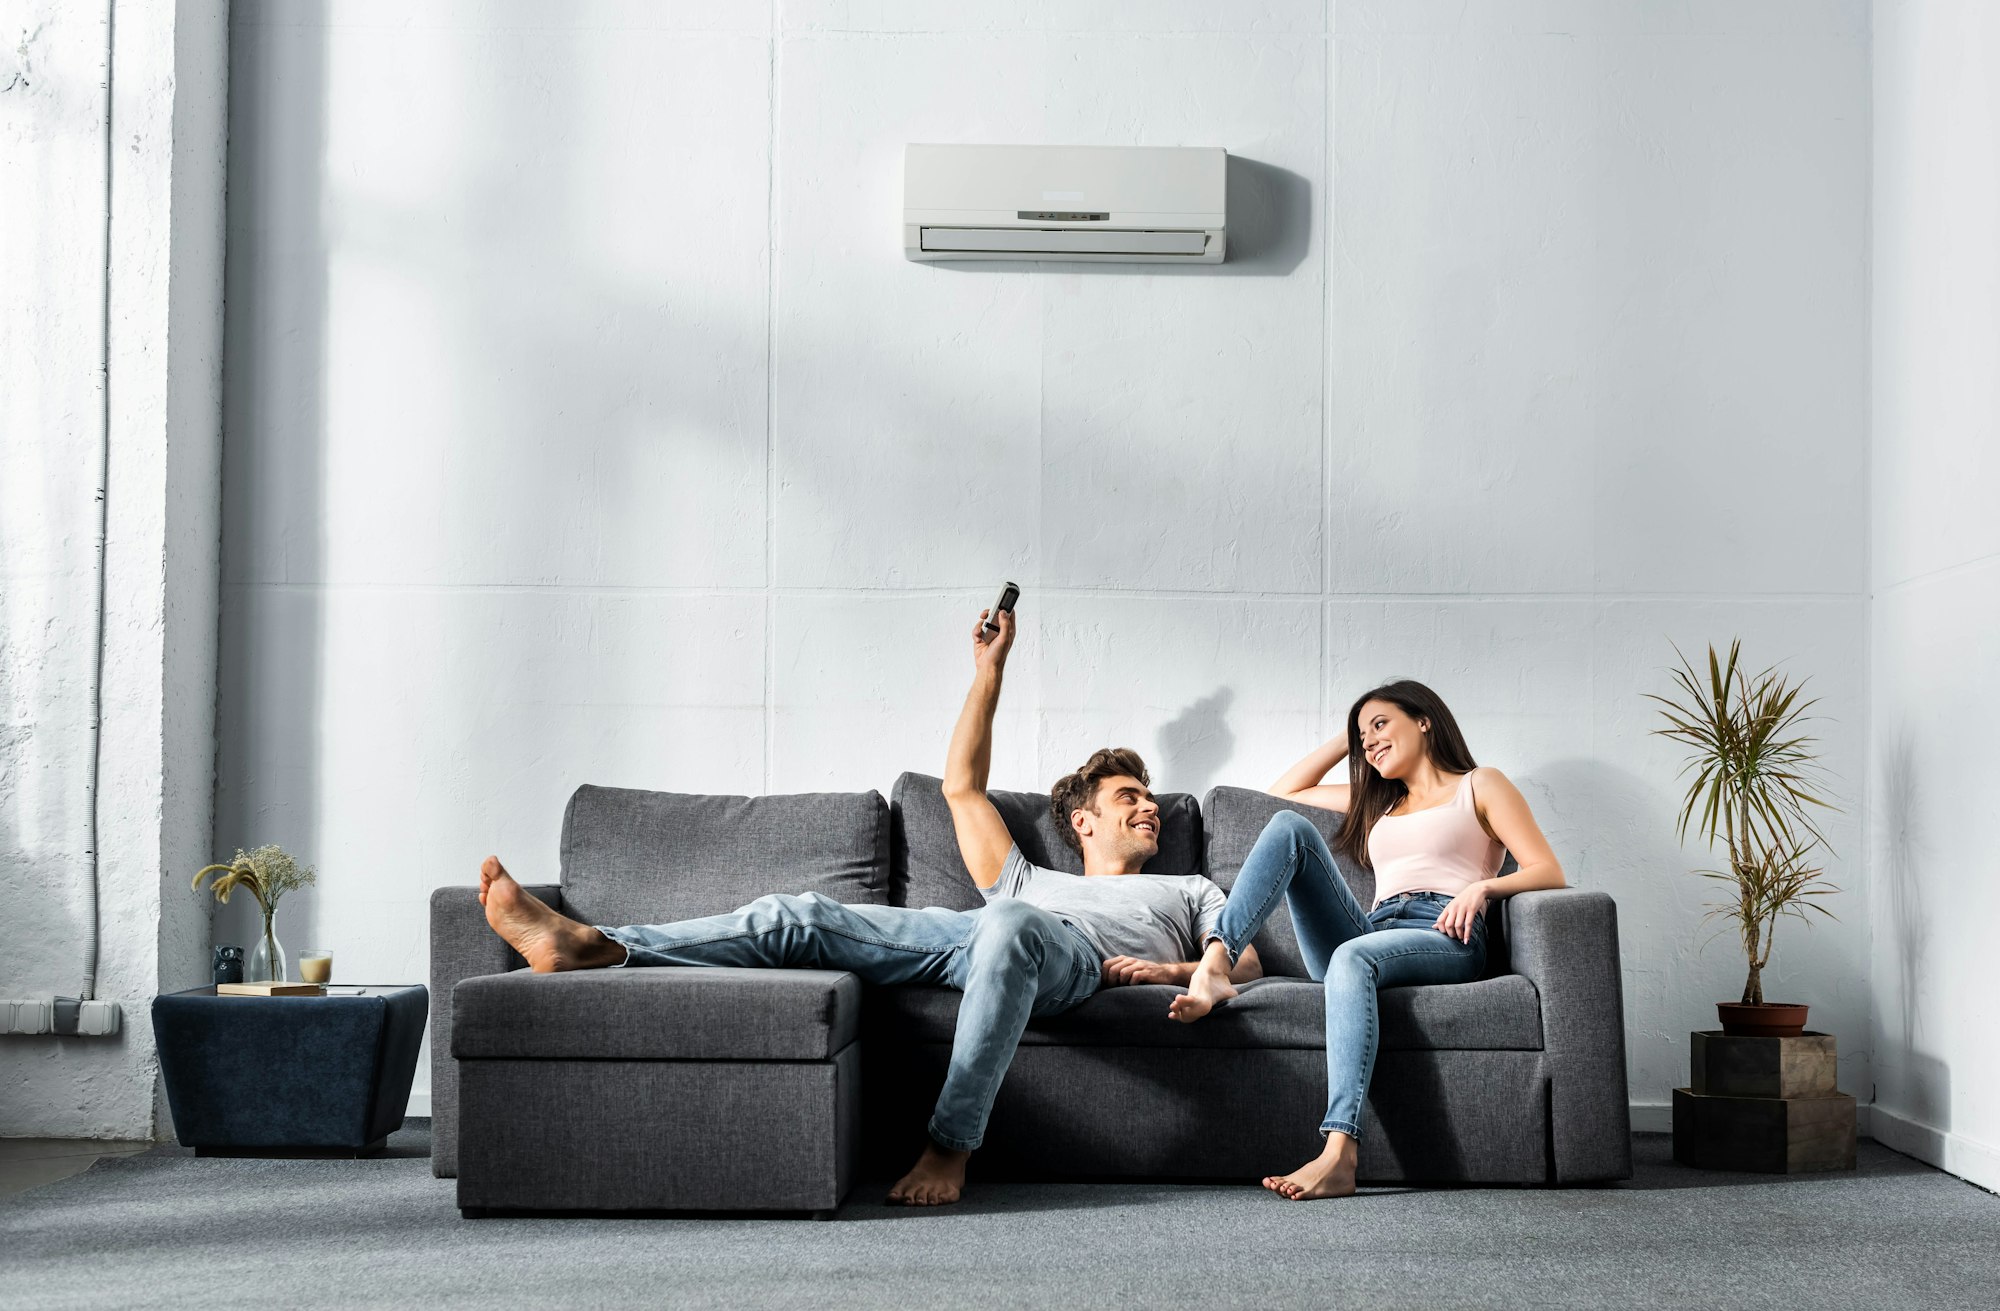 RHMH A man and a woman relax on a gray sofa, with the man holding a remote control and looking at the woman. An air conditioner from an Air Conditioning Company in Timmins, Ontario is mounted on the wall above them. Heating And Air Conditioning